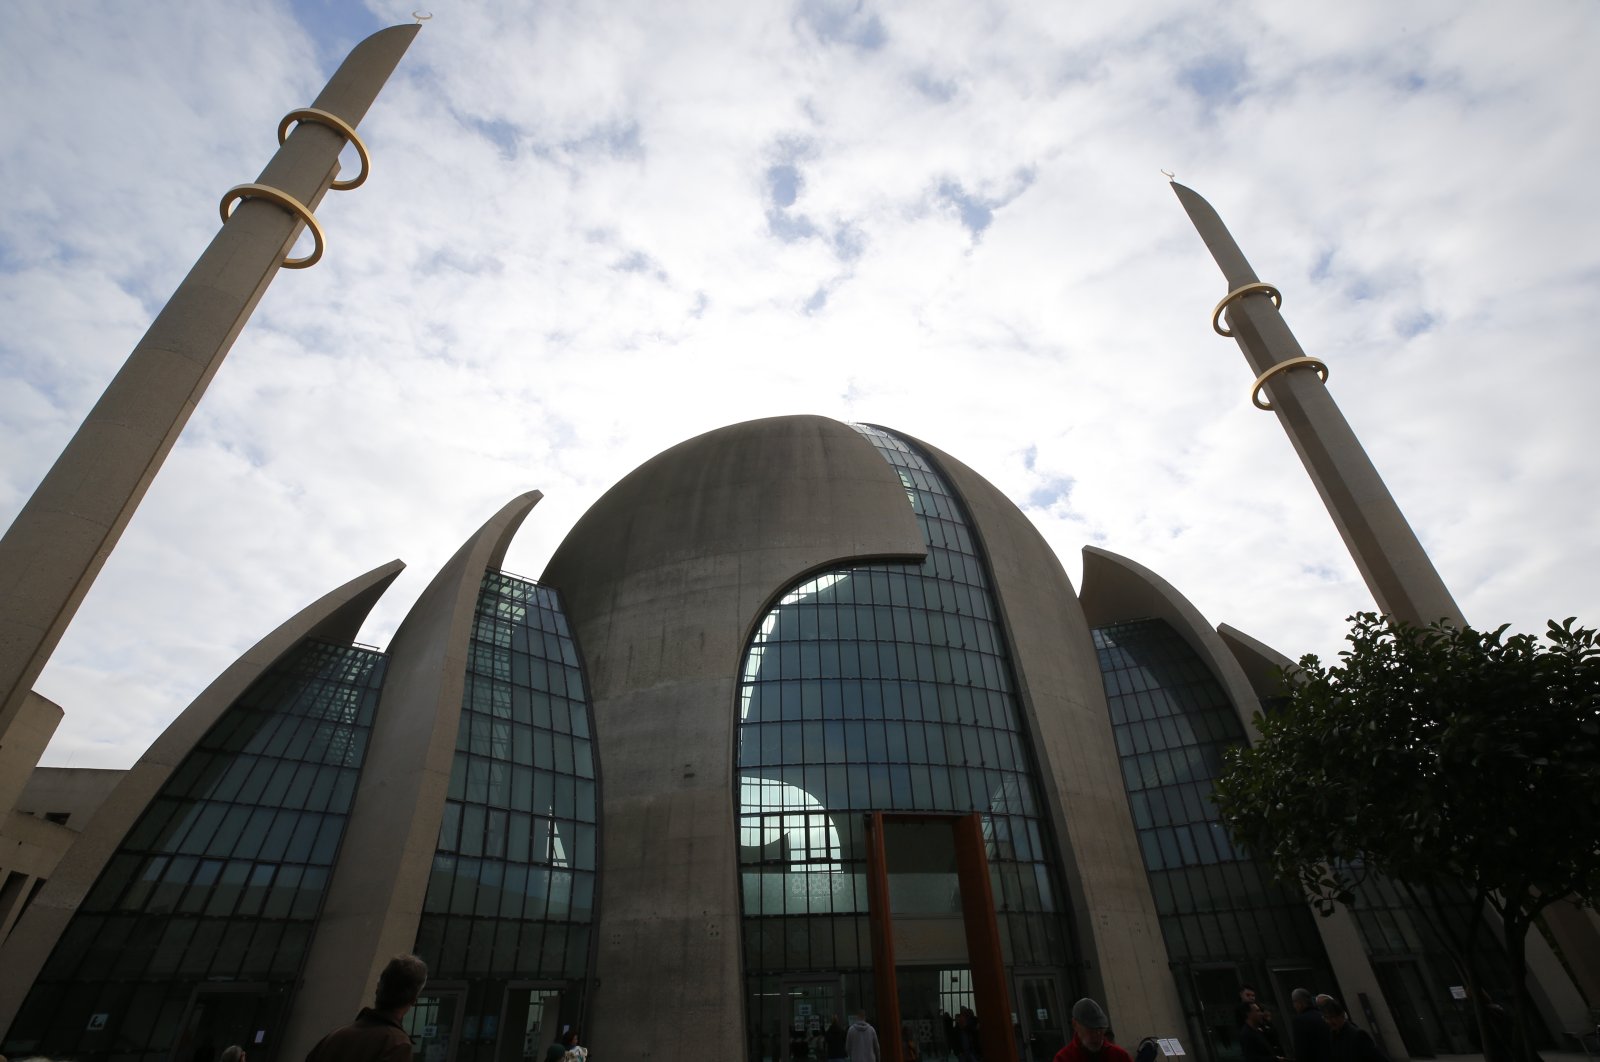 The DITIB Mosque in Cologne is seen in this picture, Germany, Oct. 3, 2022. (AA Photo)